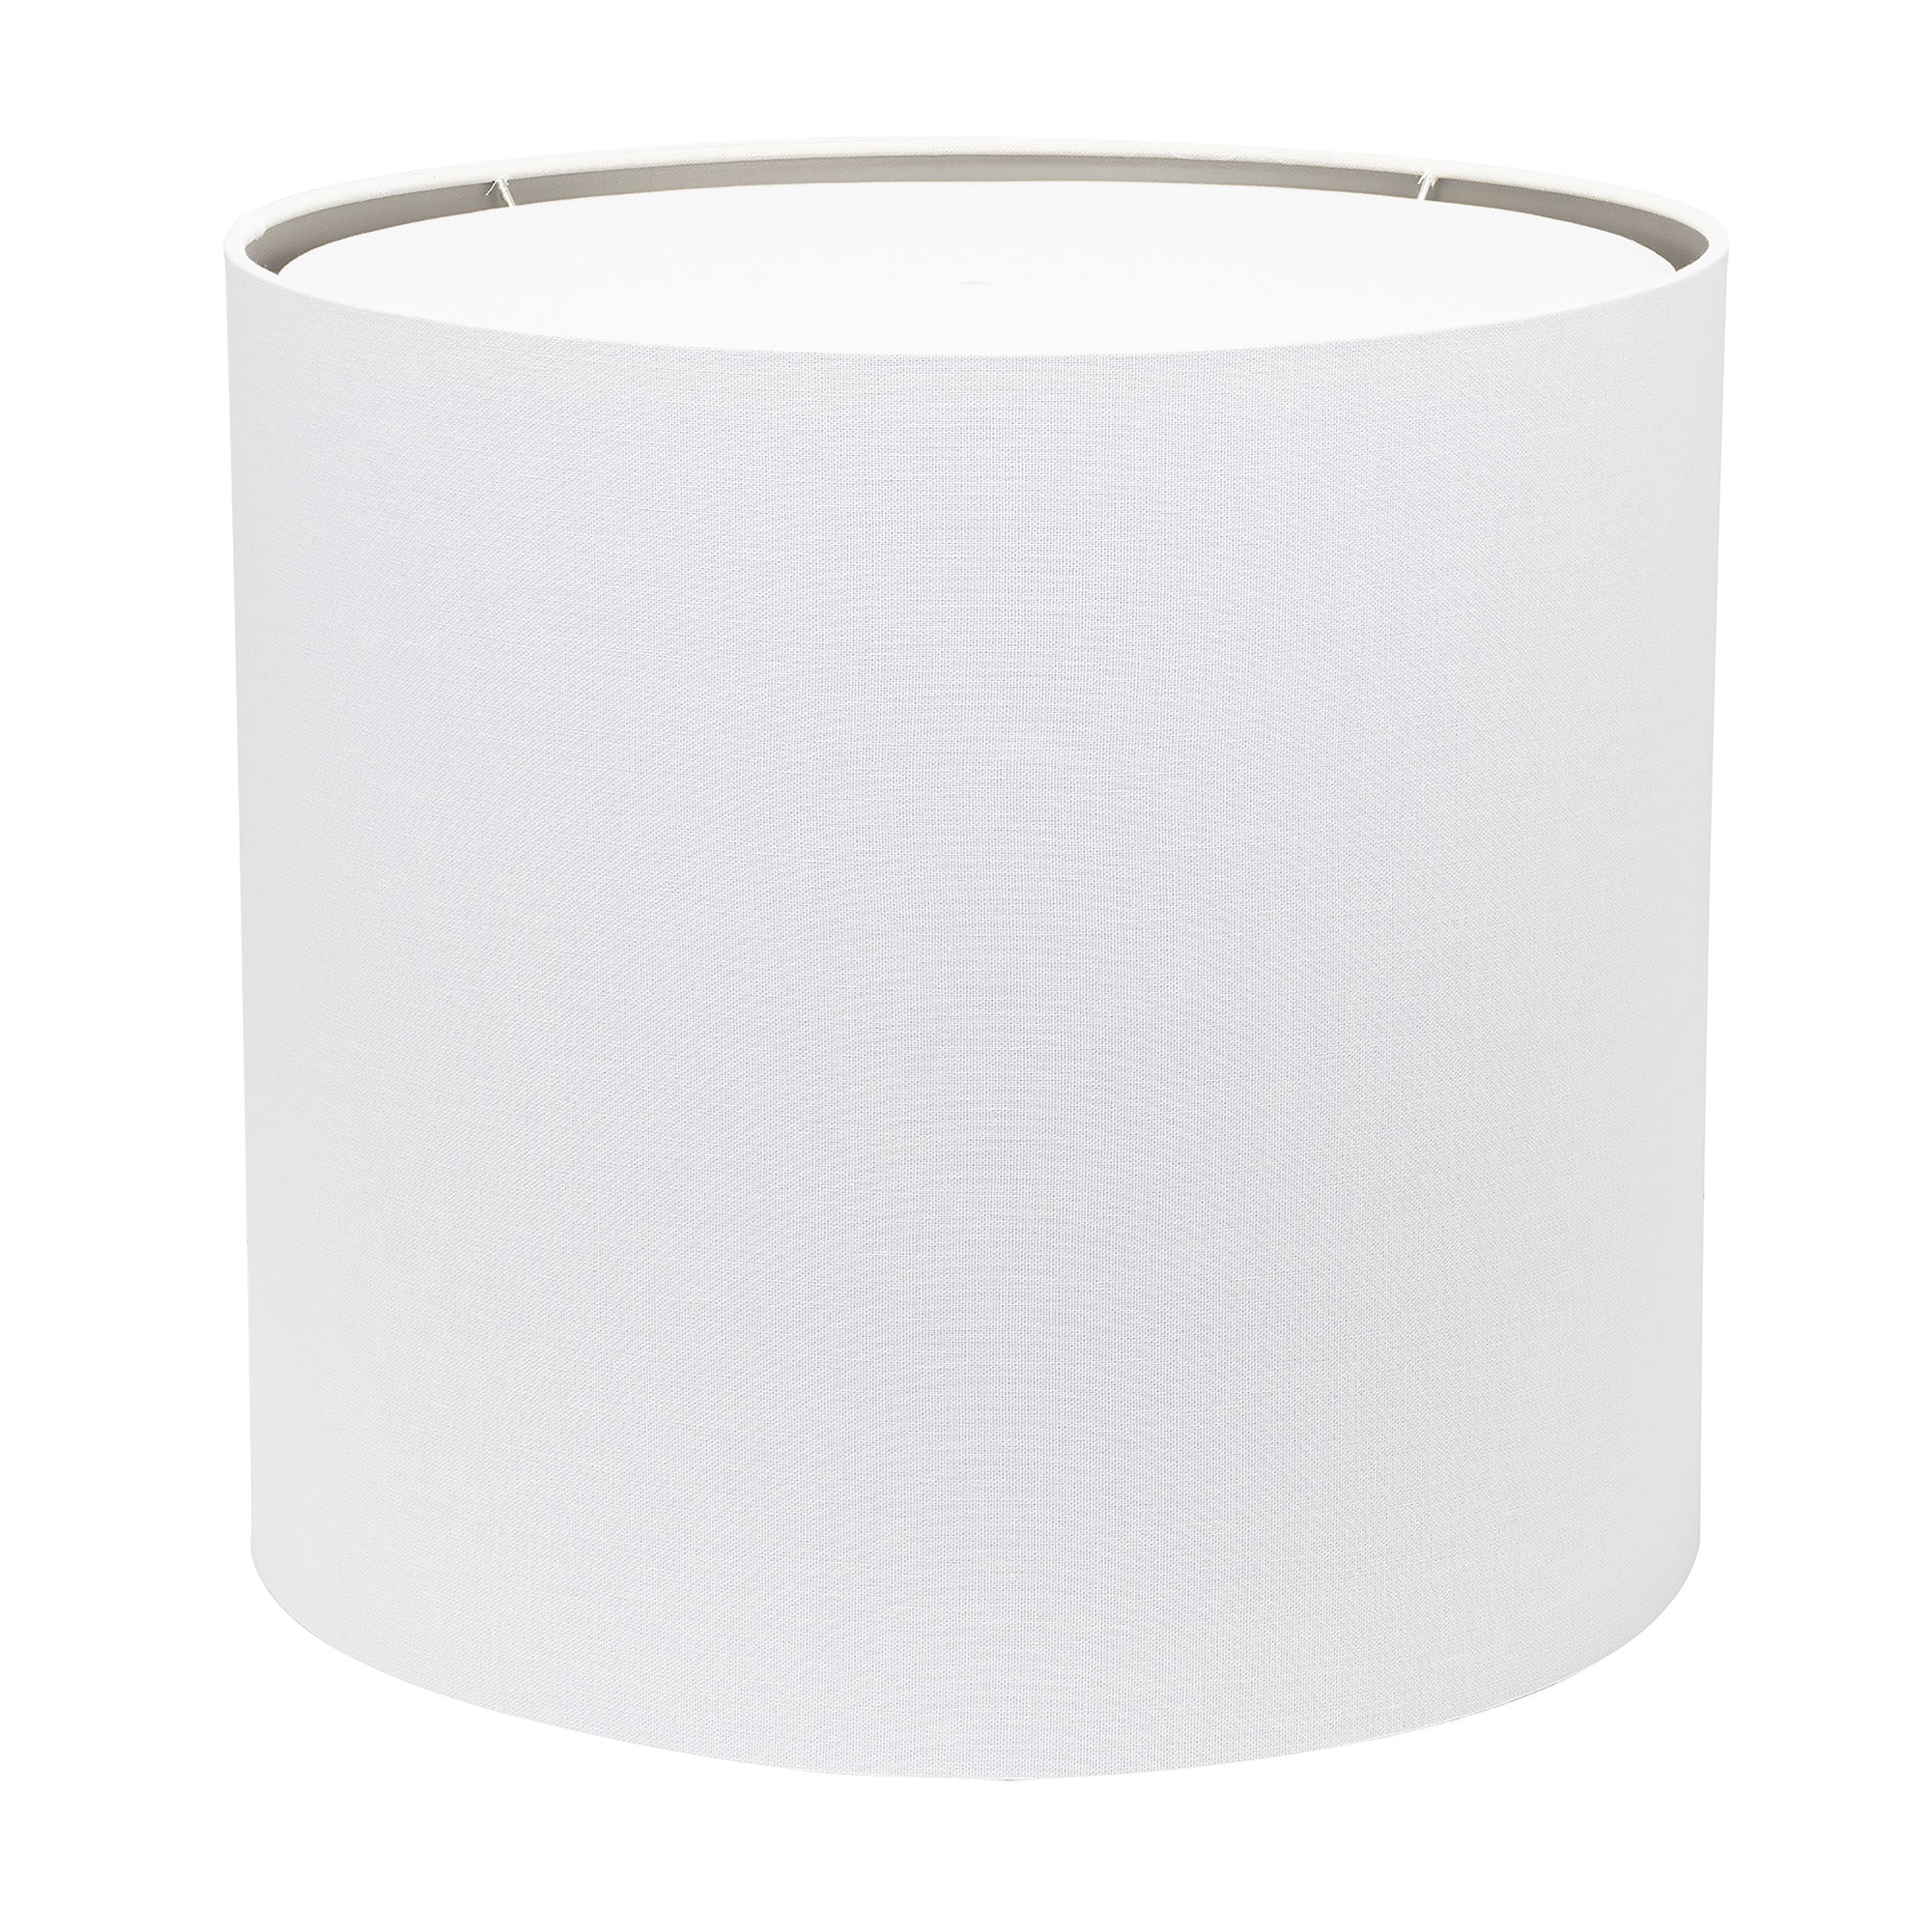 Round White Linen Drum Shade with Silver Lining 18" x 18" x 16" - Couture Lamps